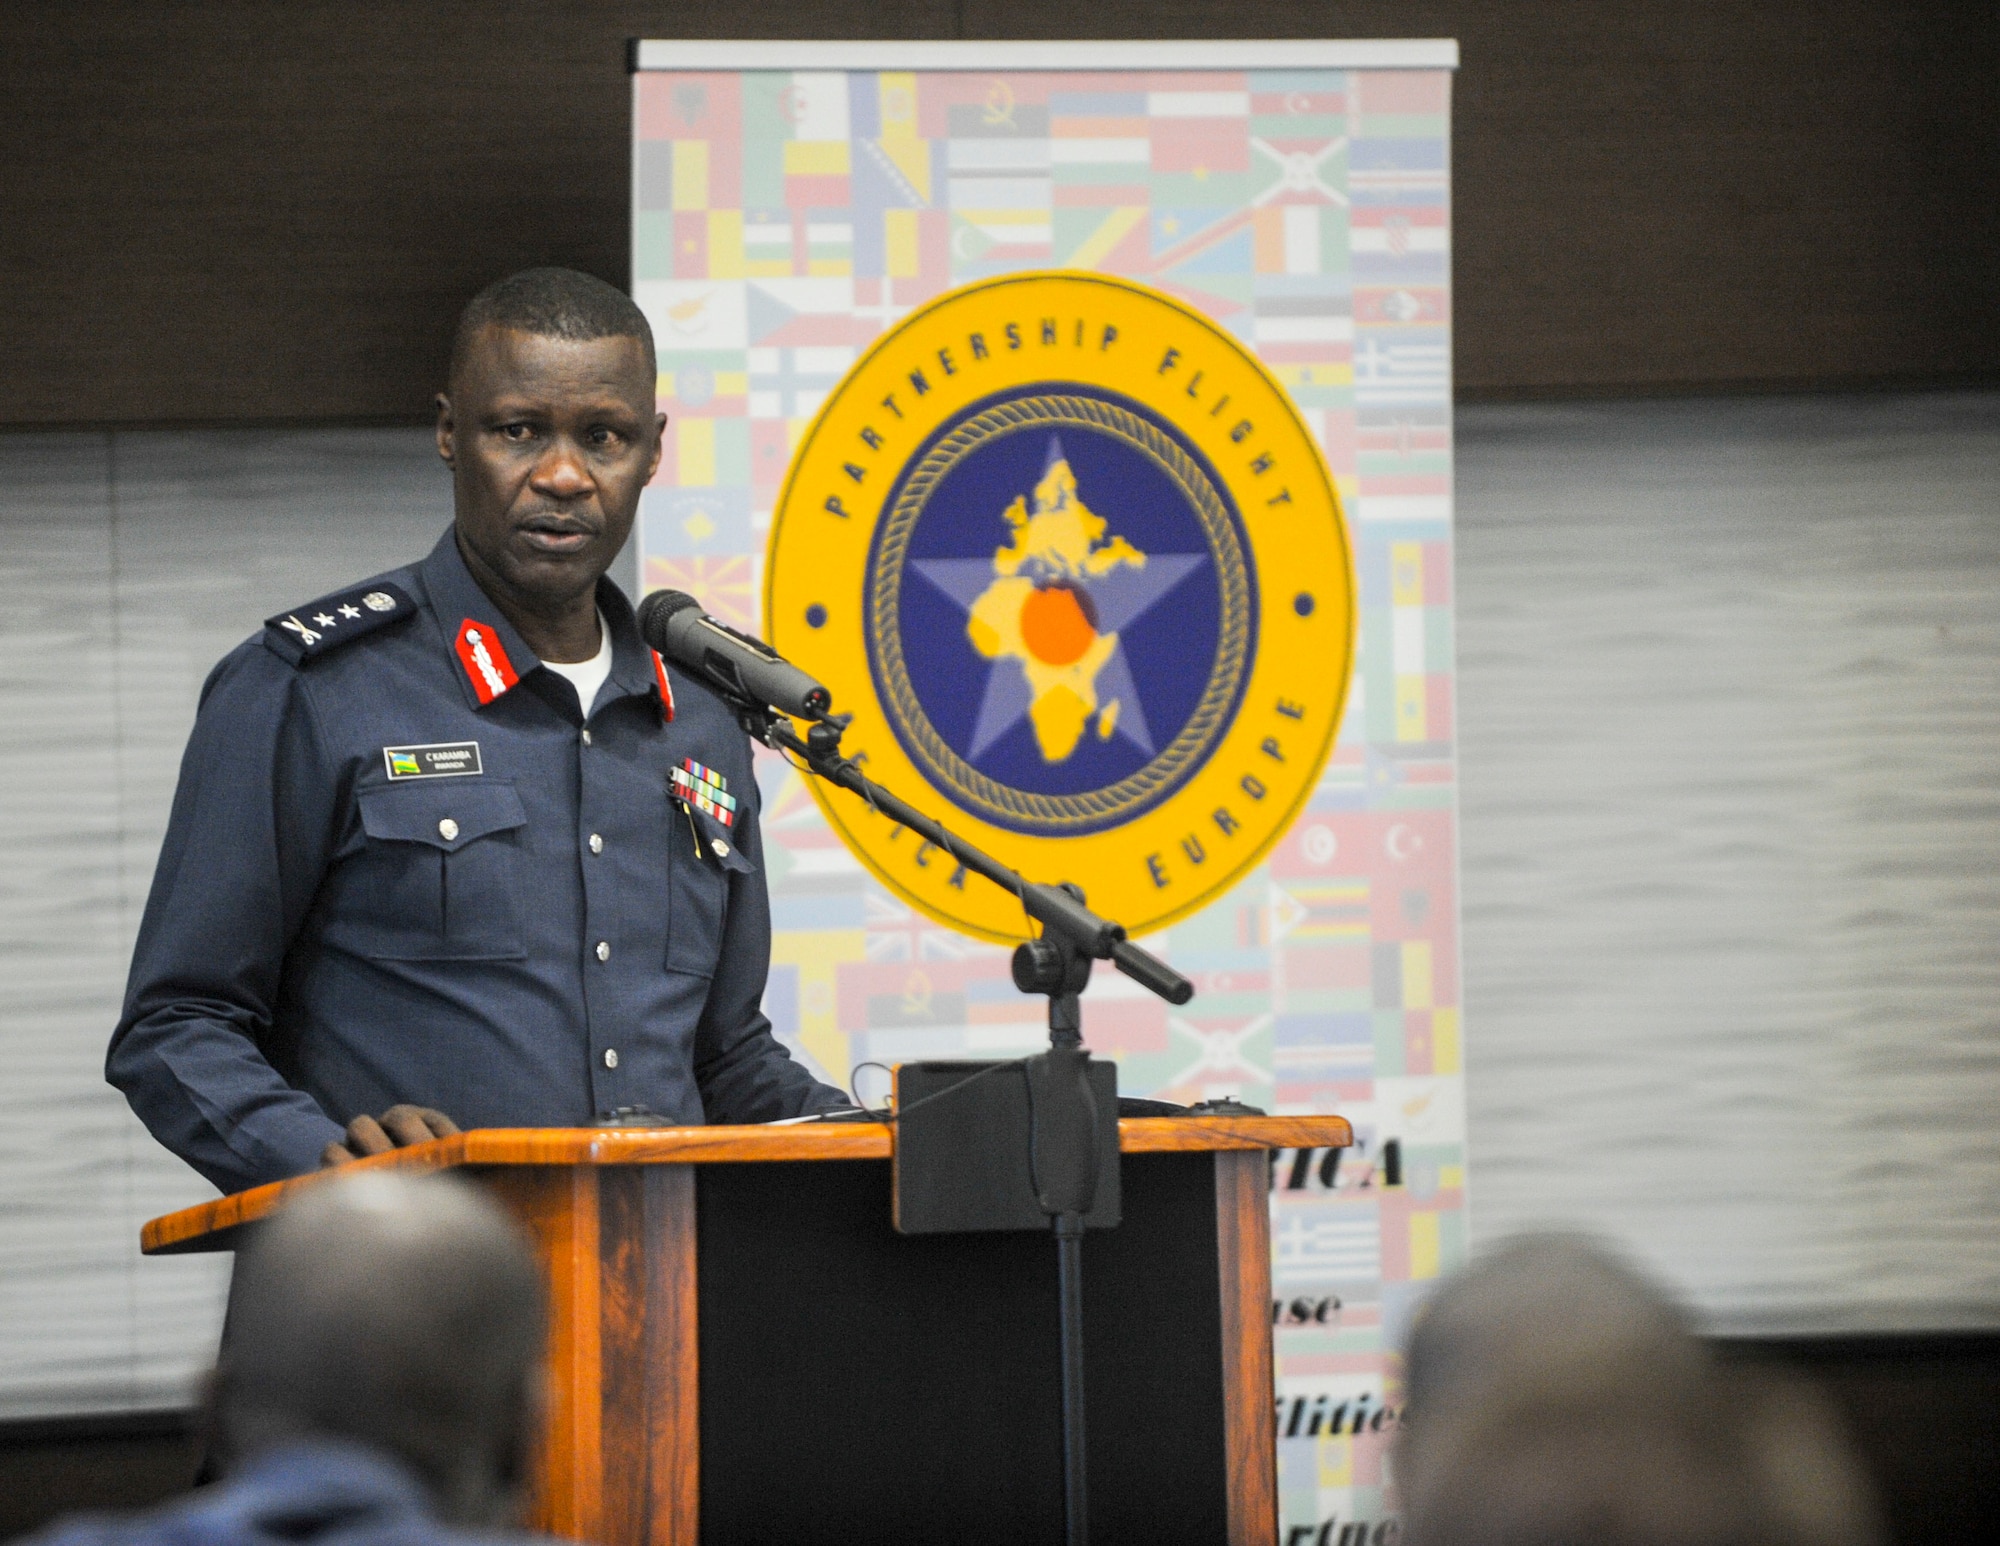 Rwanda Air Force Air Chief, Maj. Gen. Charles Karamba gives remarks during the African Partnership Flight Rwanda opening ceremony in Kigali, Rwanda, March 4, 2019. The APF program is intended to build strong, transparent partnerships that enhance regional stability and security. APF Rwanda's focus is on sharing best practices for flight, ground, and weapon safety. (U.S. Air Force photo by Tech. Sgt. Timothy Moore)